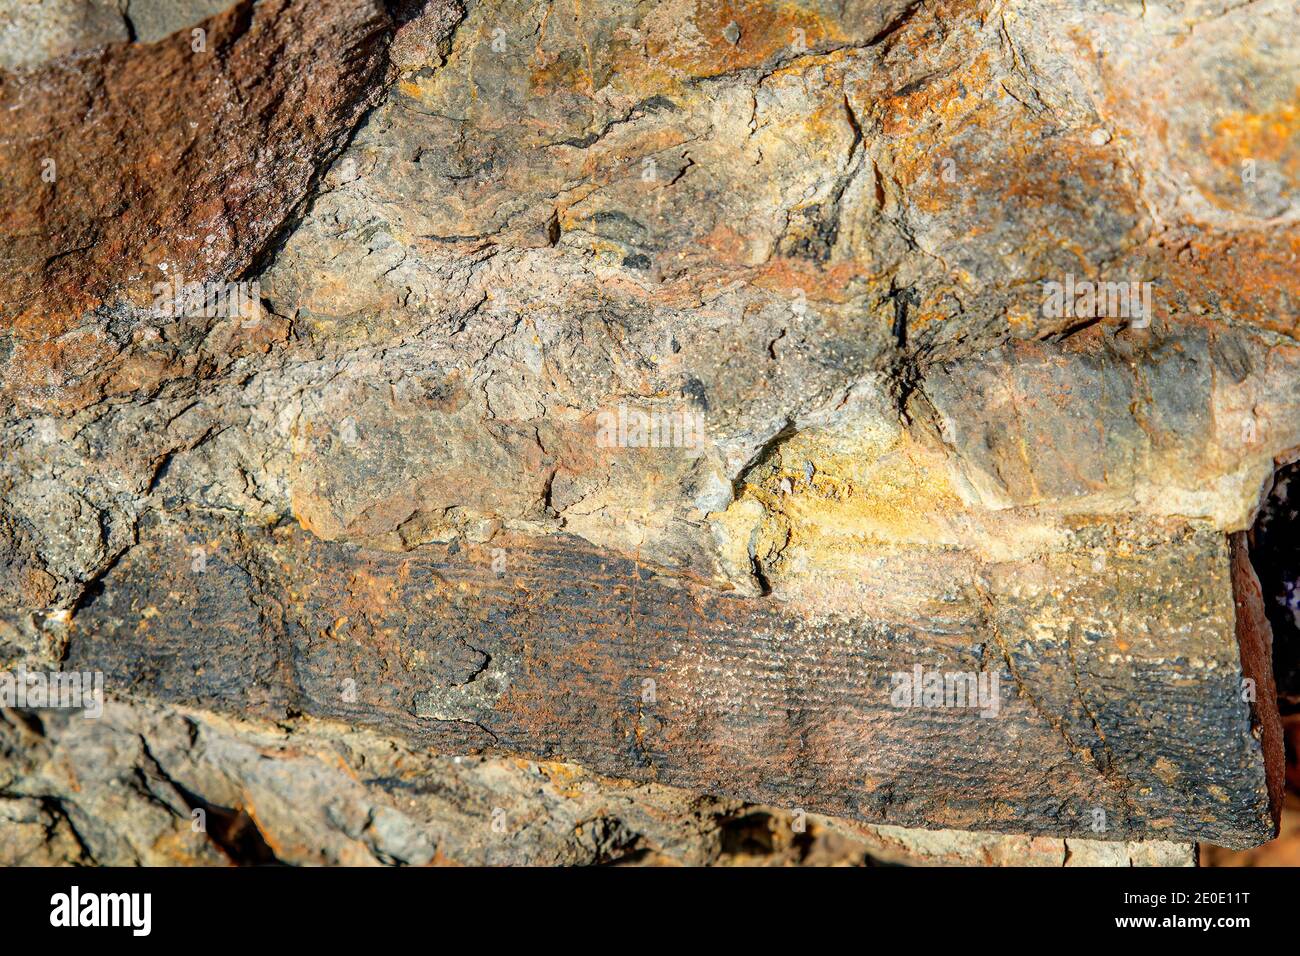 A weathered fossil of a calamites branch in the side of a cliff. Calamites were common in the Carboniferous Period about 300 million years ago. Stock Photo